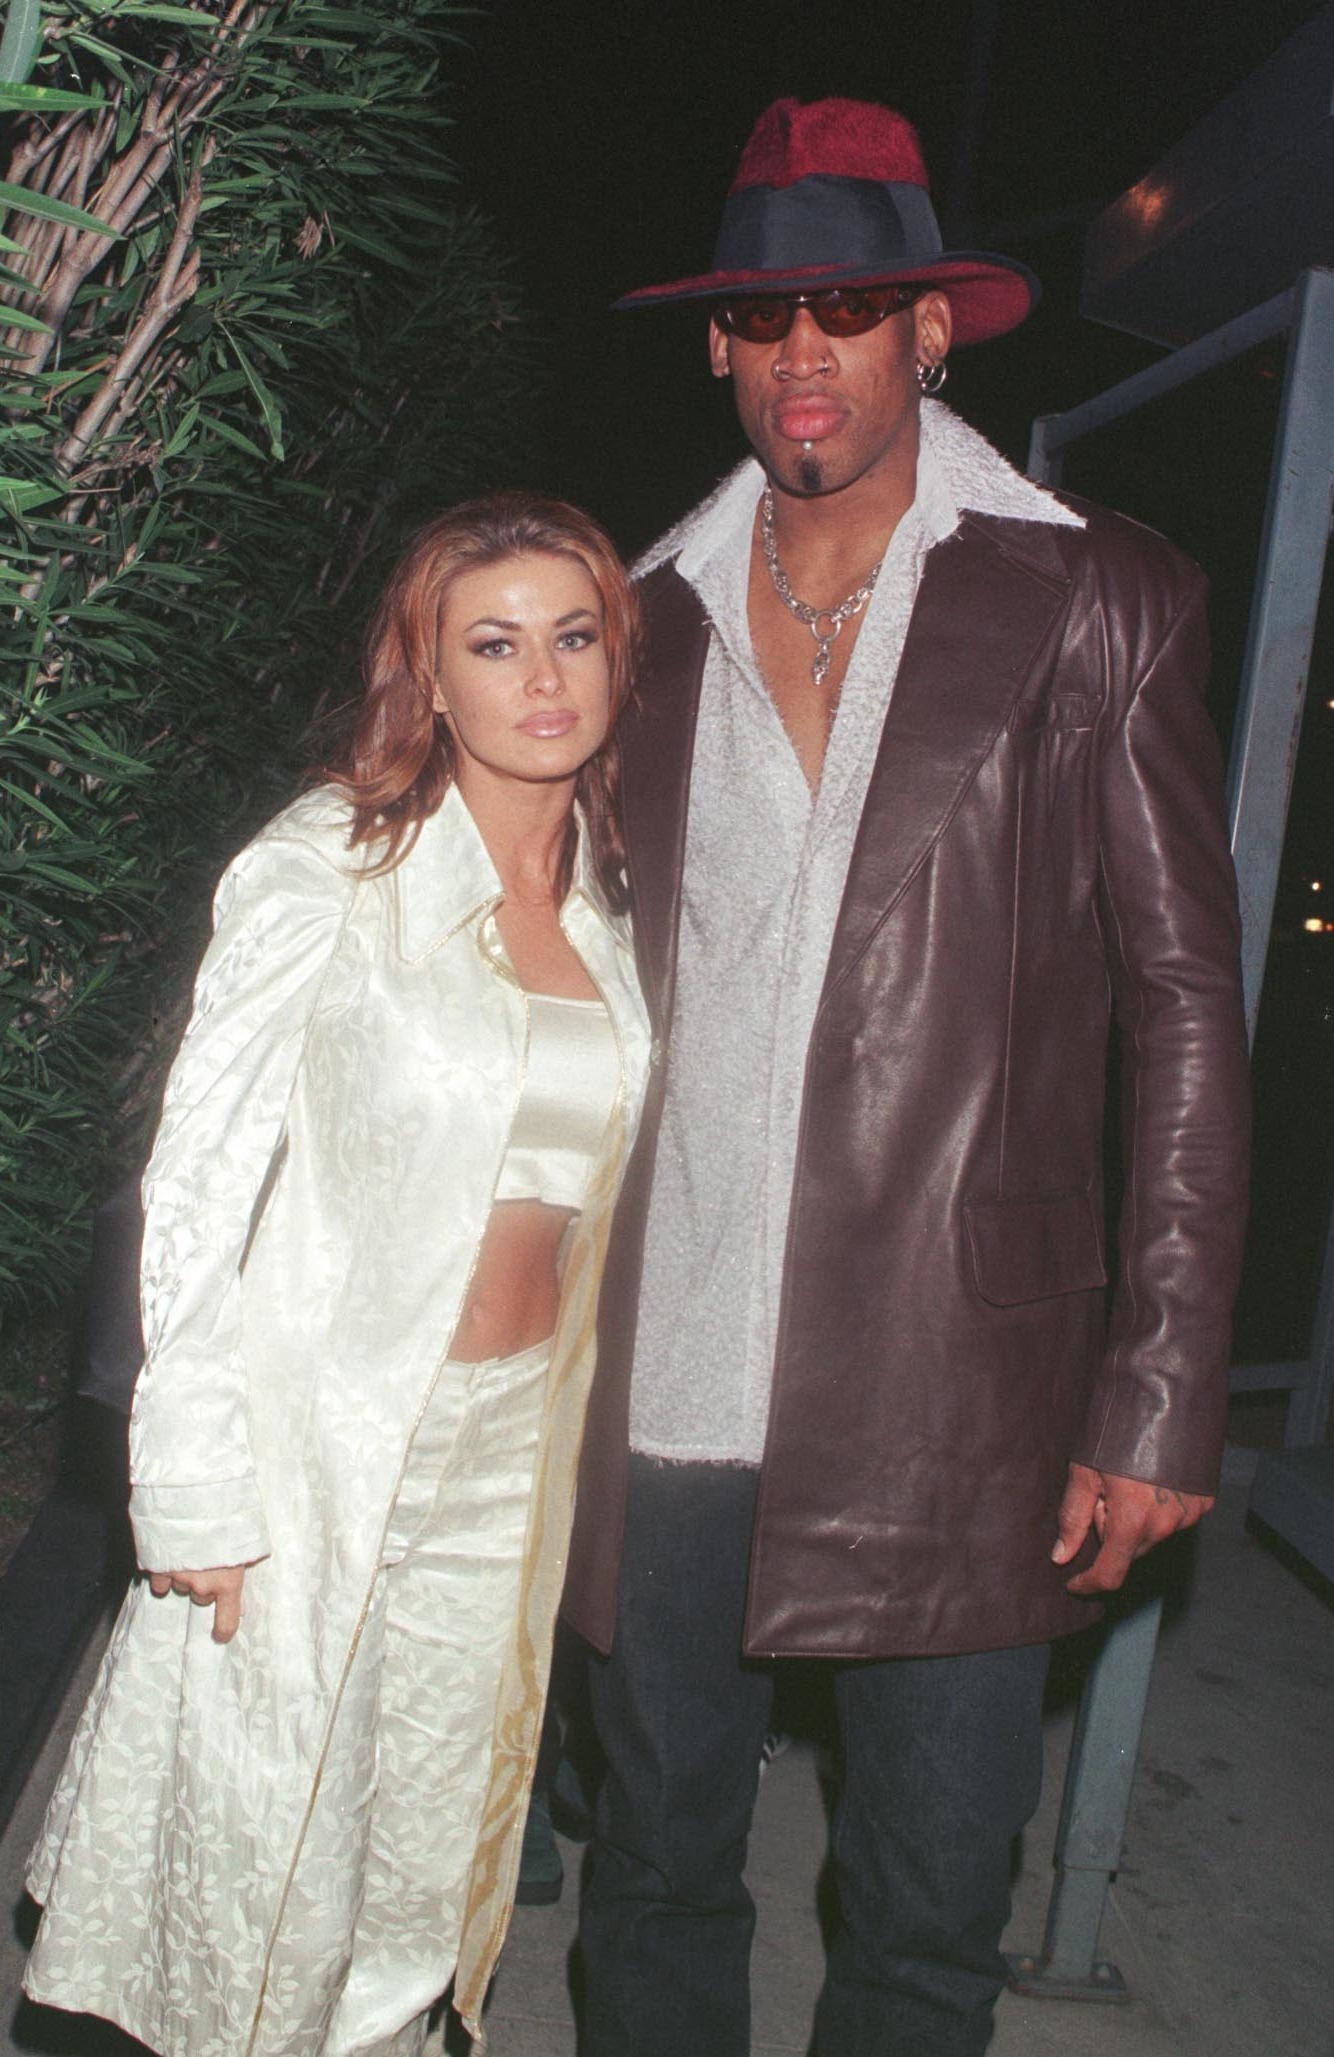 Carmen Electra and Dennis Rodman on the red carpet